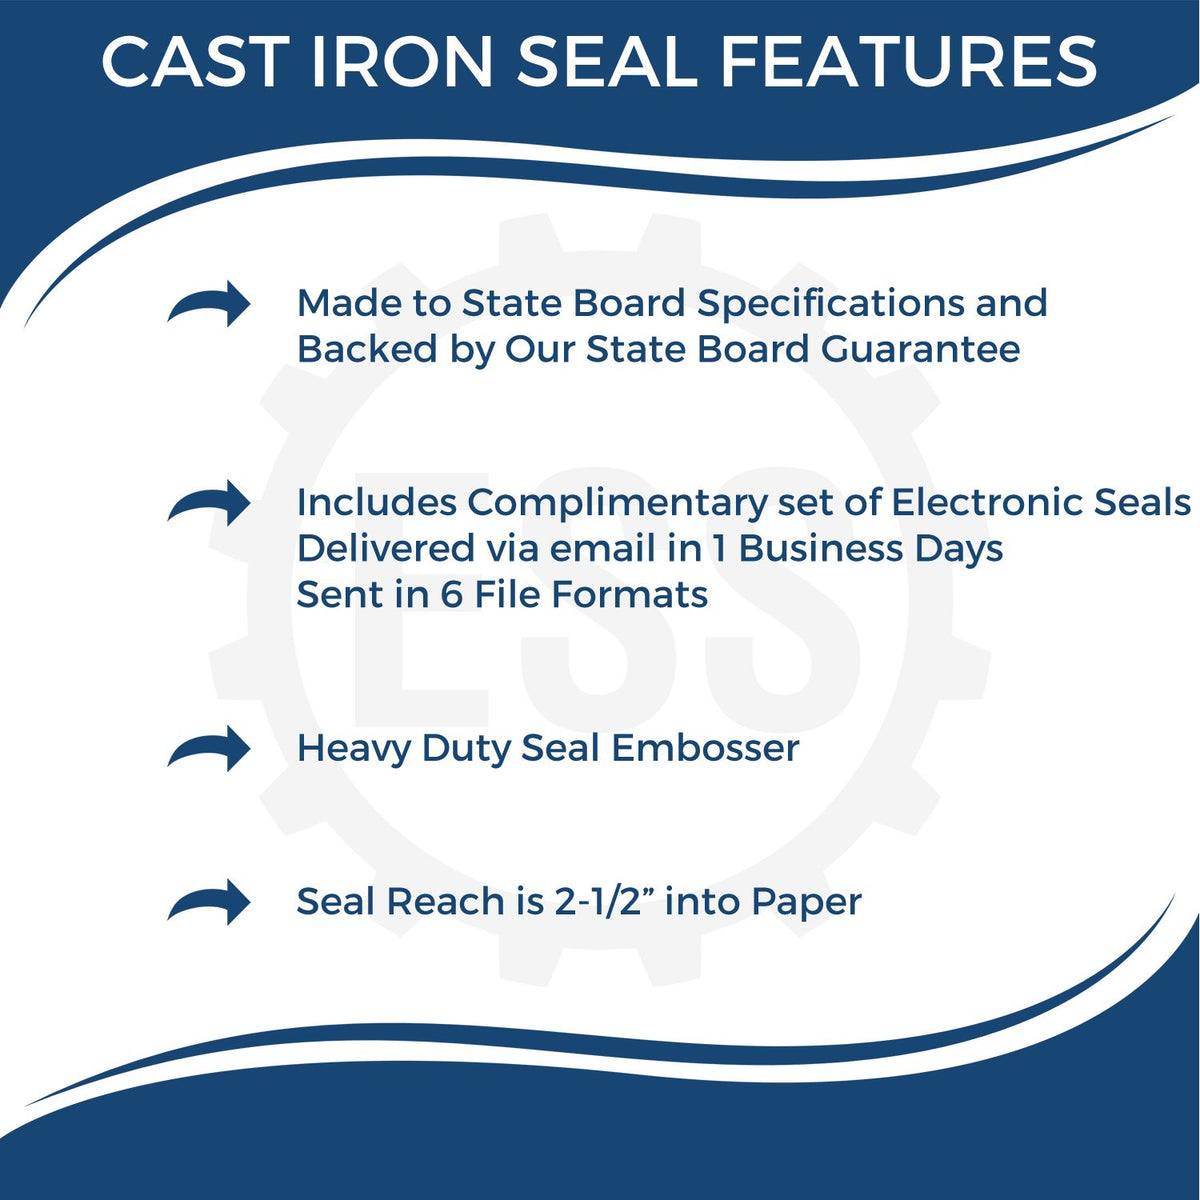 A picture of an infographic highlighting the selling points for the Heavy Duty Cast Iron Pennsylvania Architect Embosser